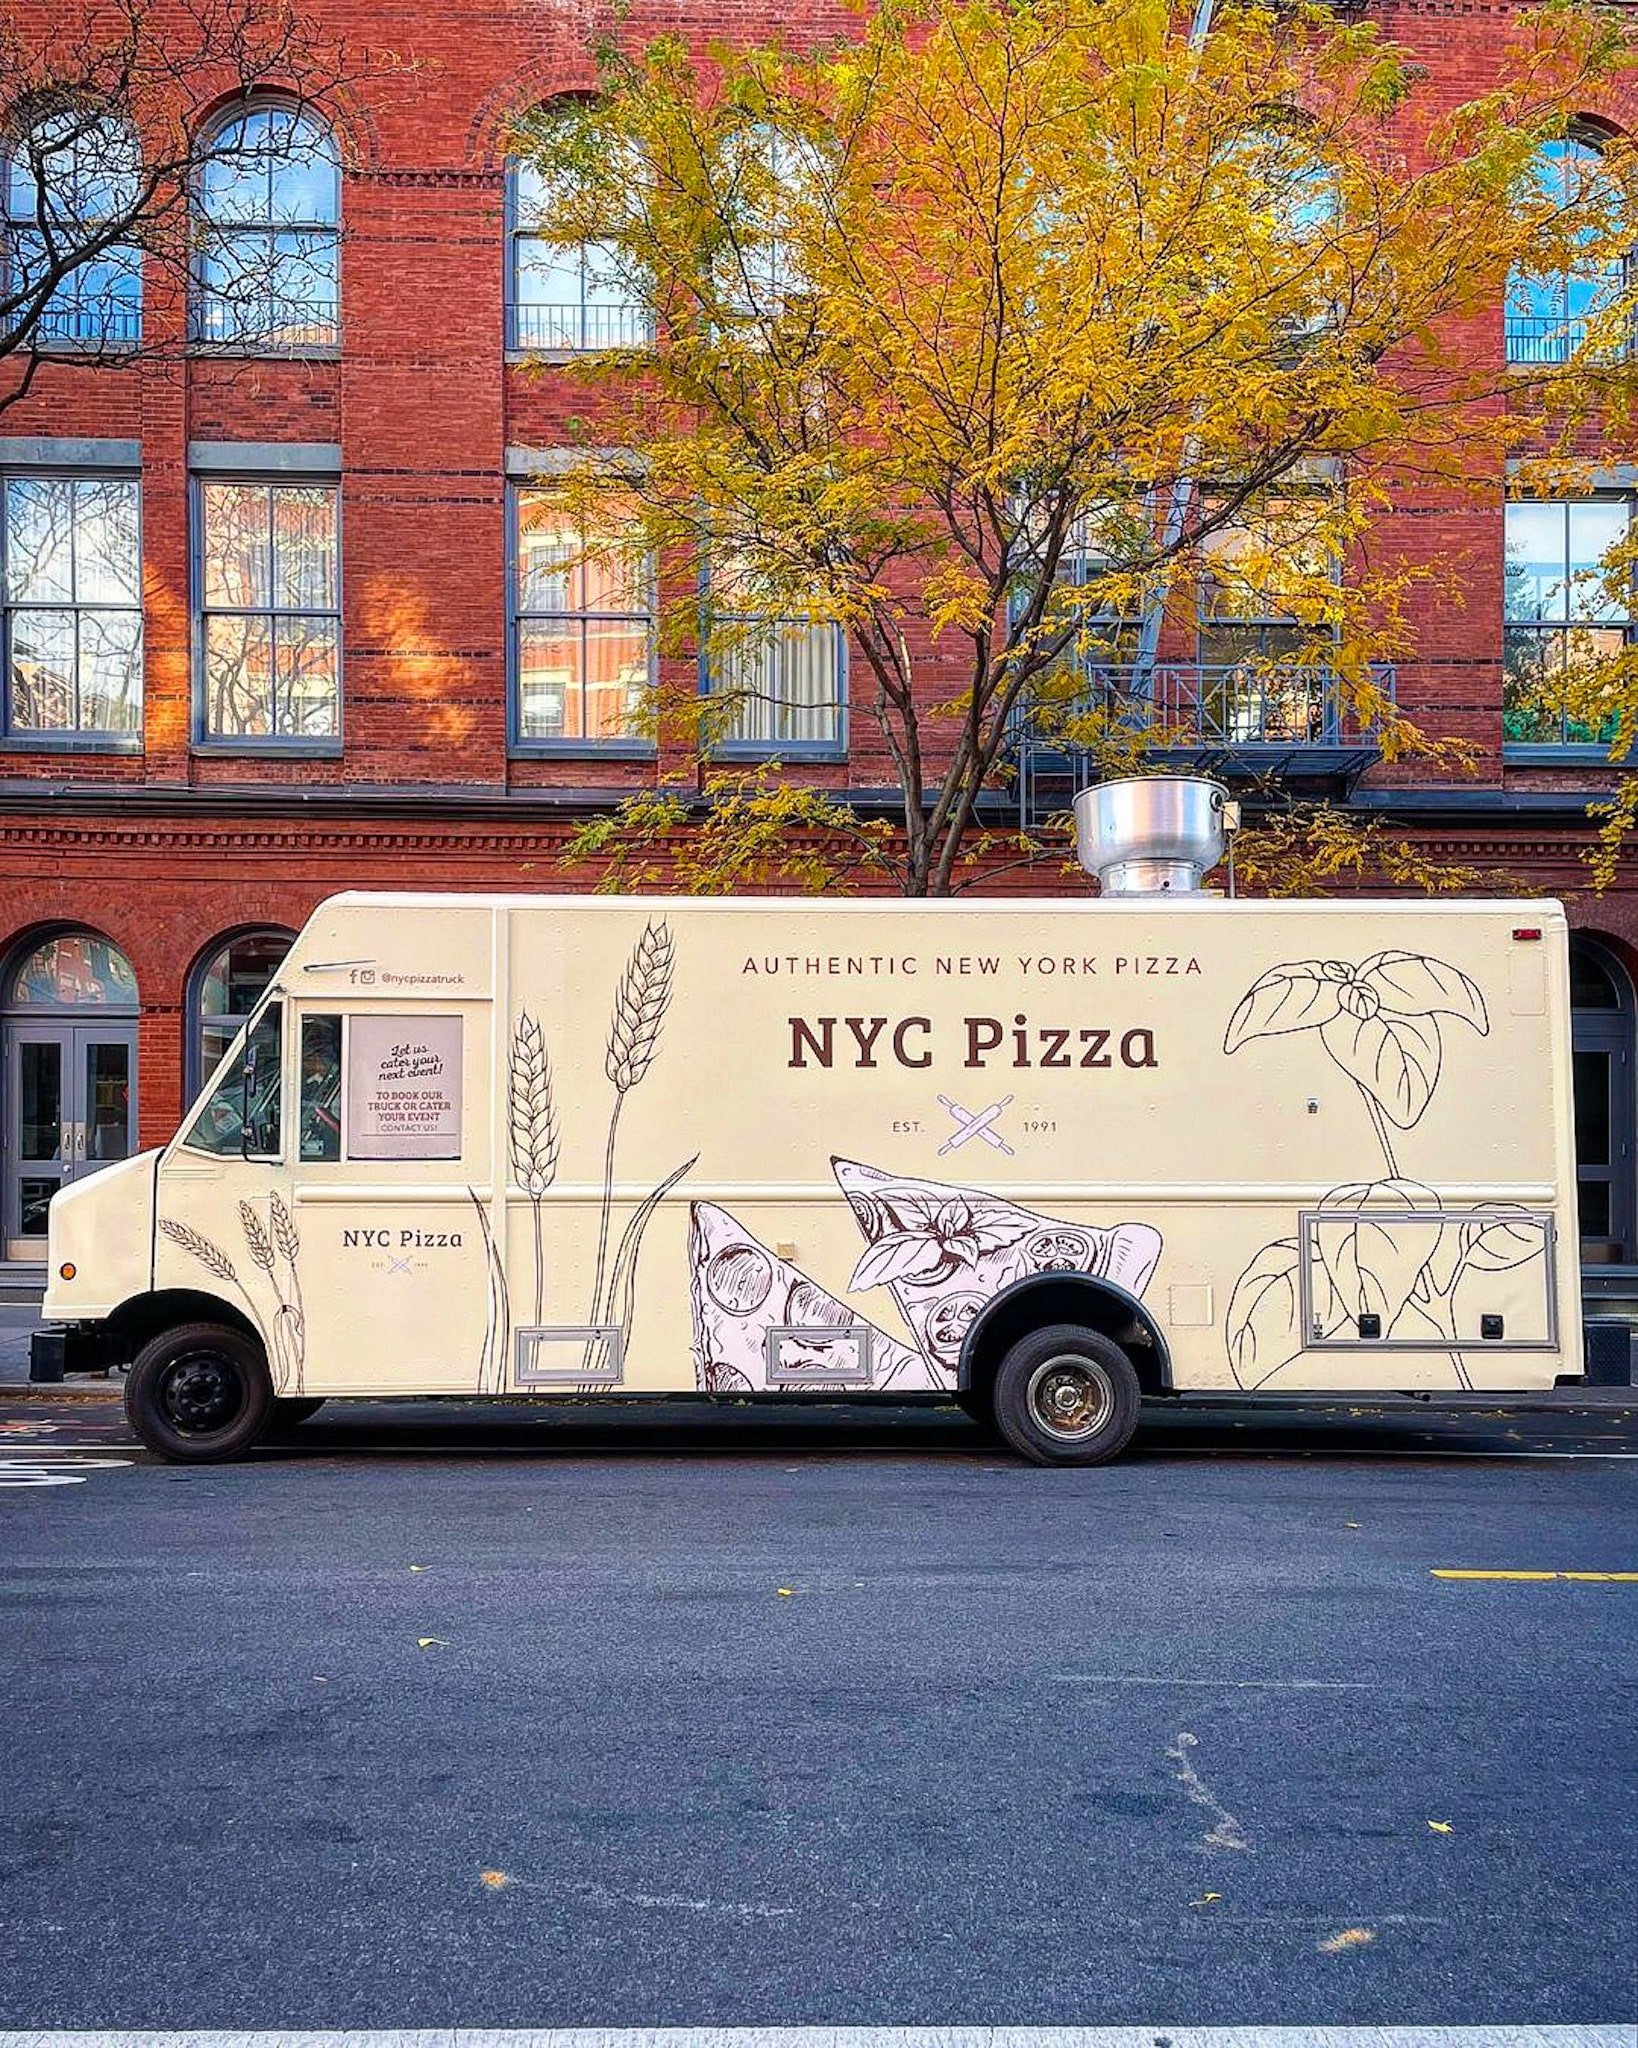 nyc pizza truck in front of red brick in new york